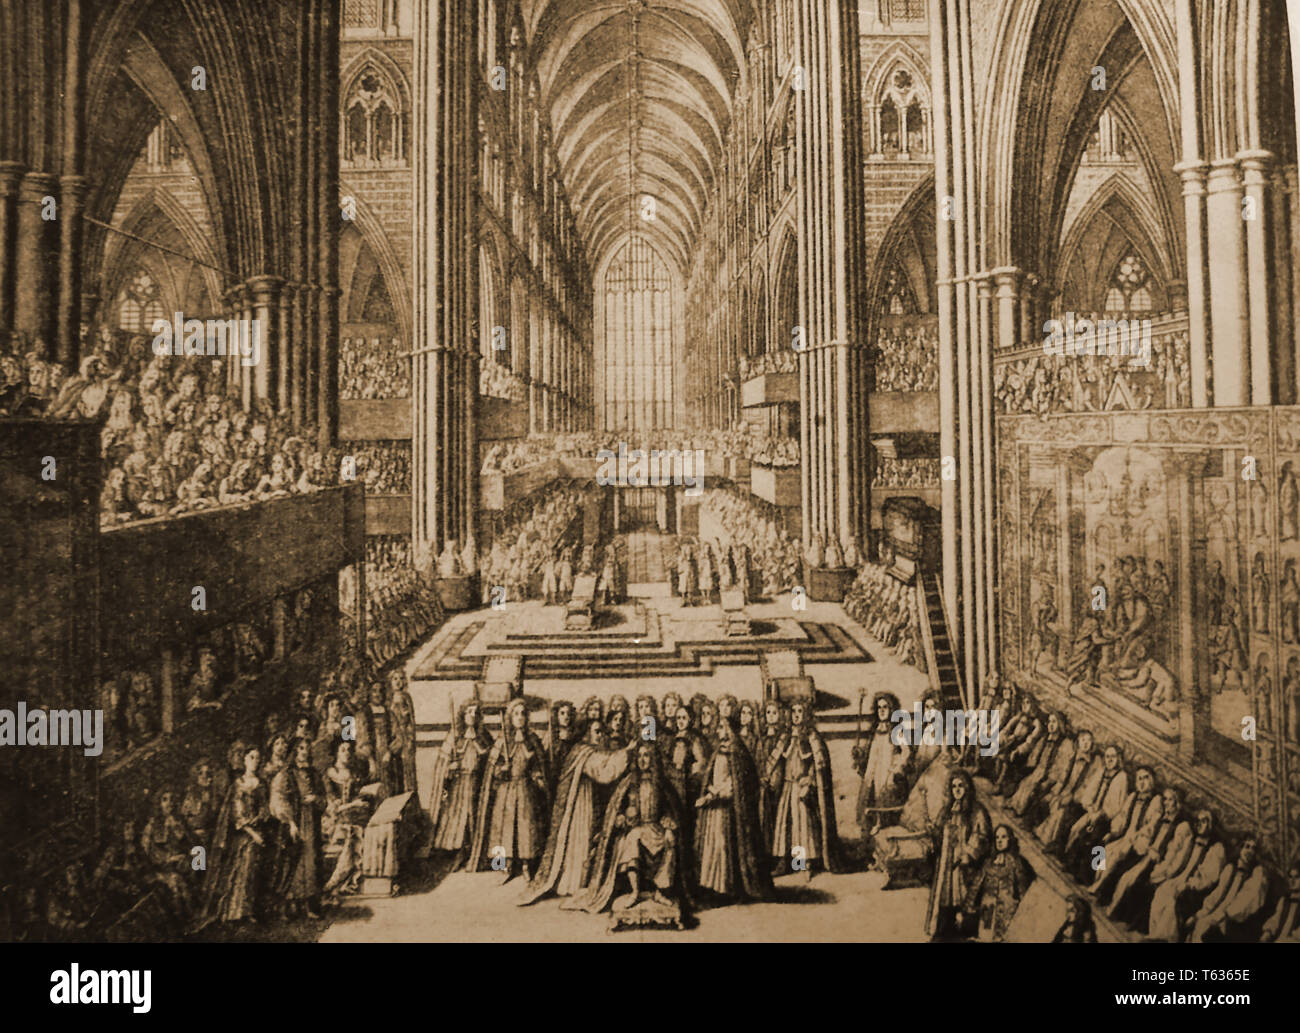 An old print showing the coronation of King James II of England and Ireland (James VII of Scotland)  and his wife queen Mary on 23 April 1685 in Westminster Abbey, London Stock Photo